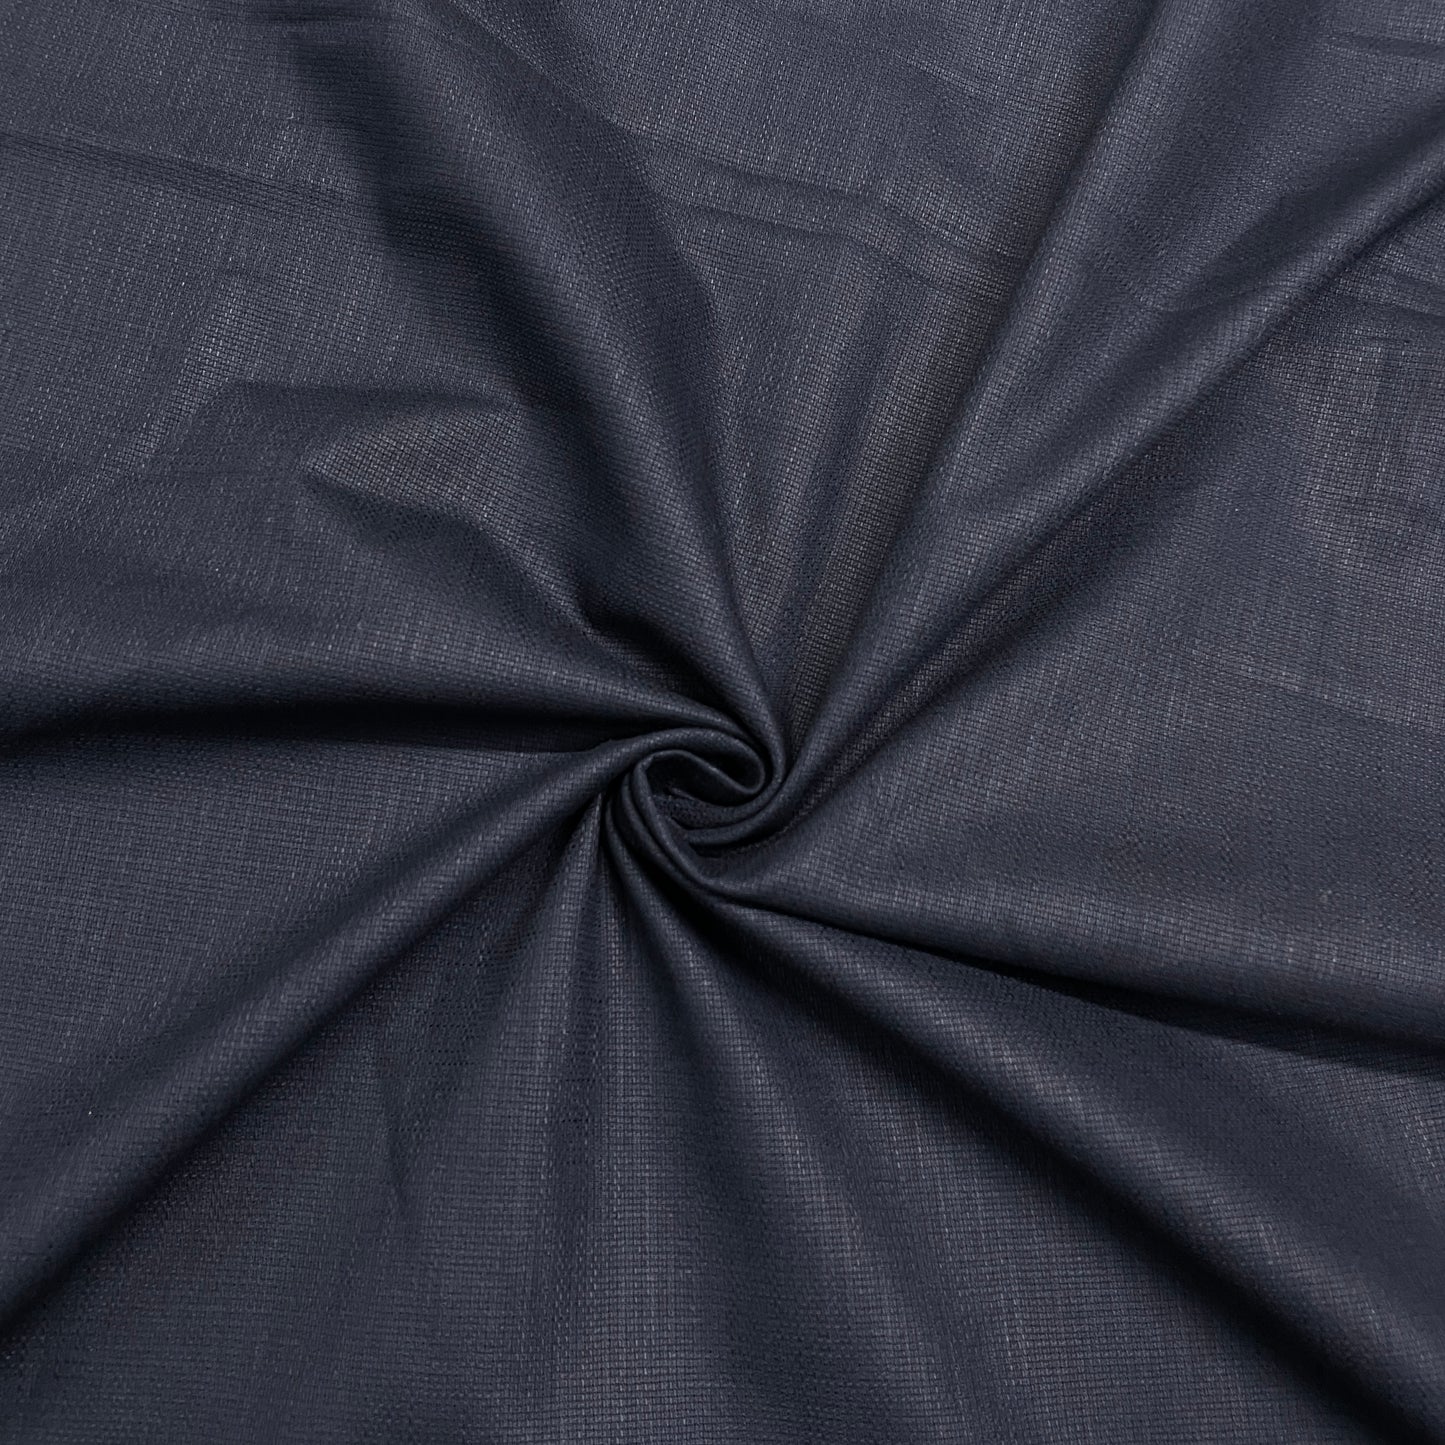 Navy Blue Solid Cotton Fabric